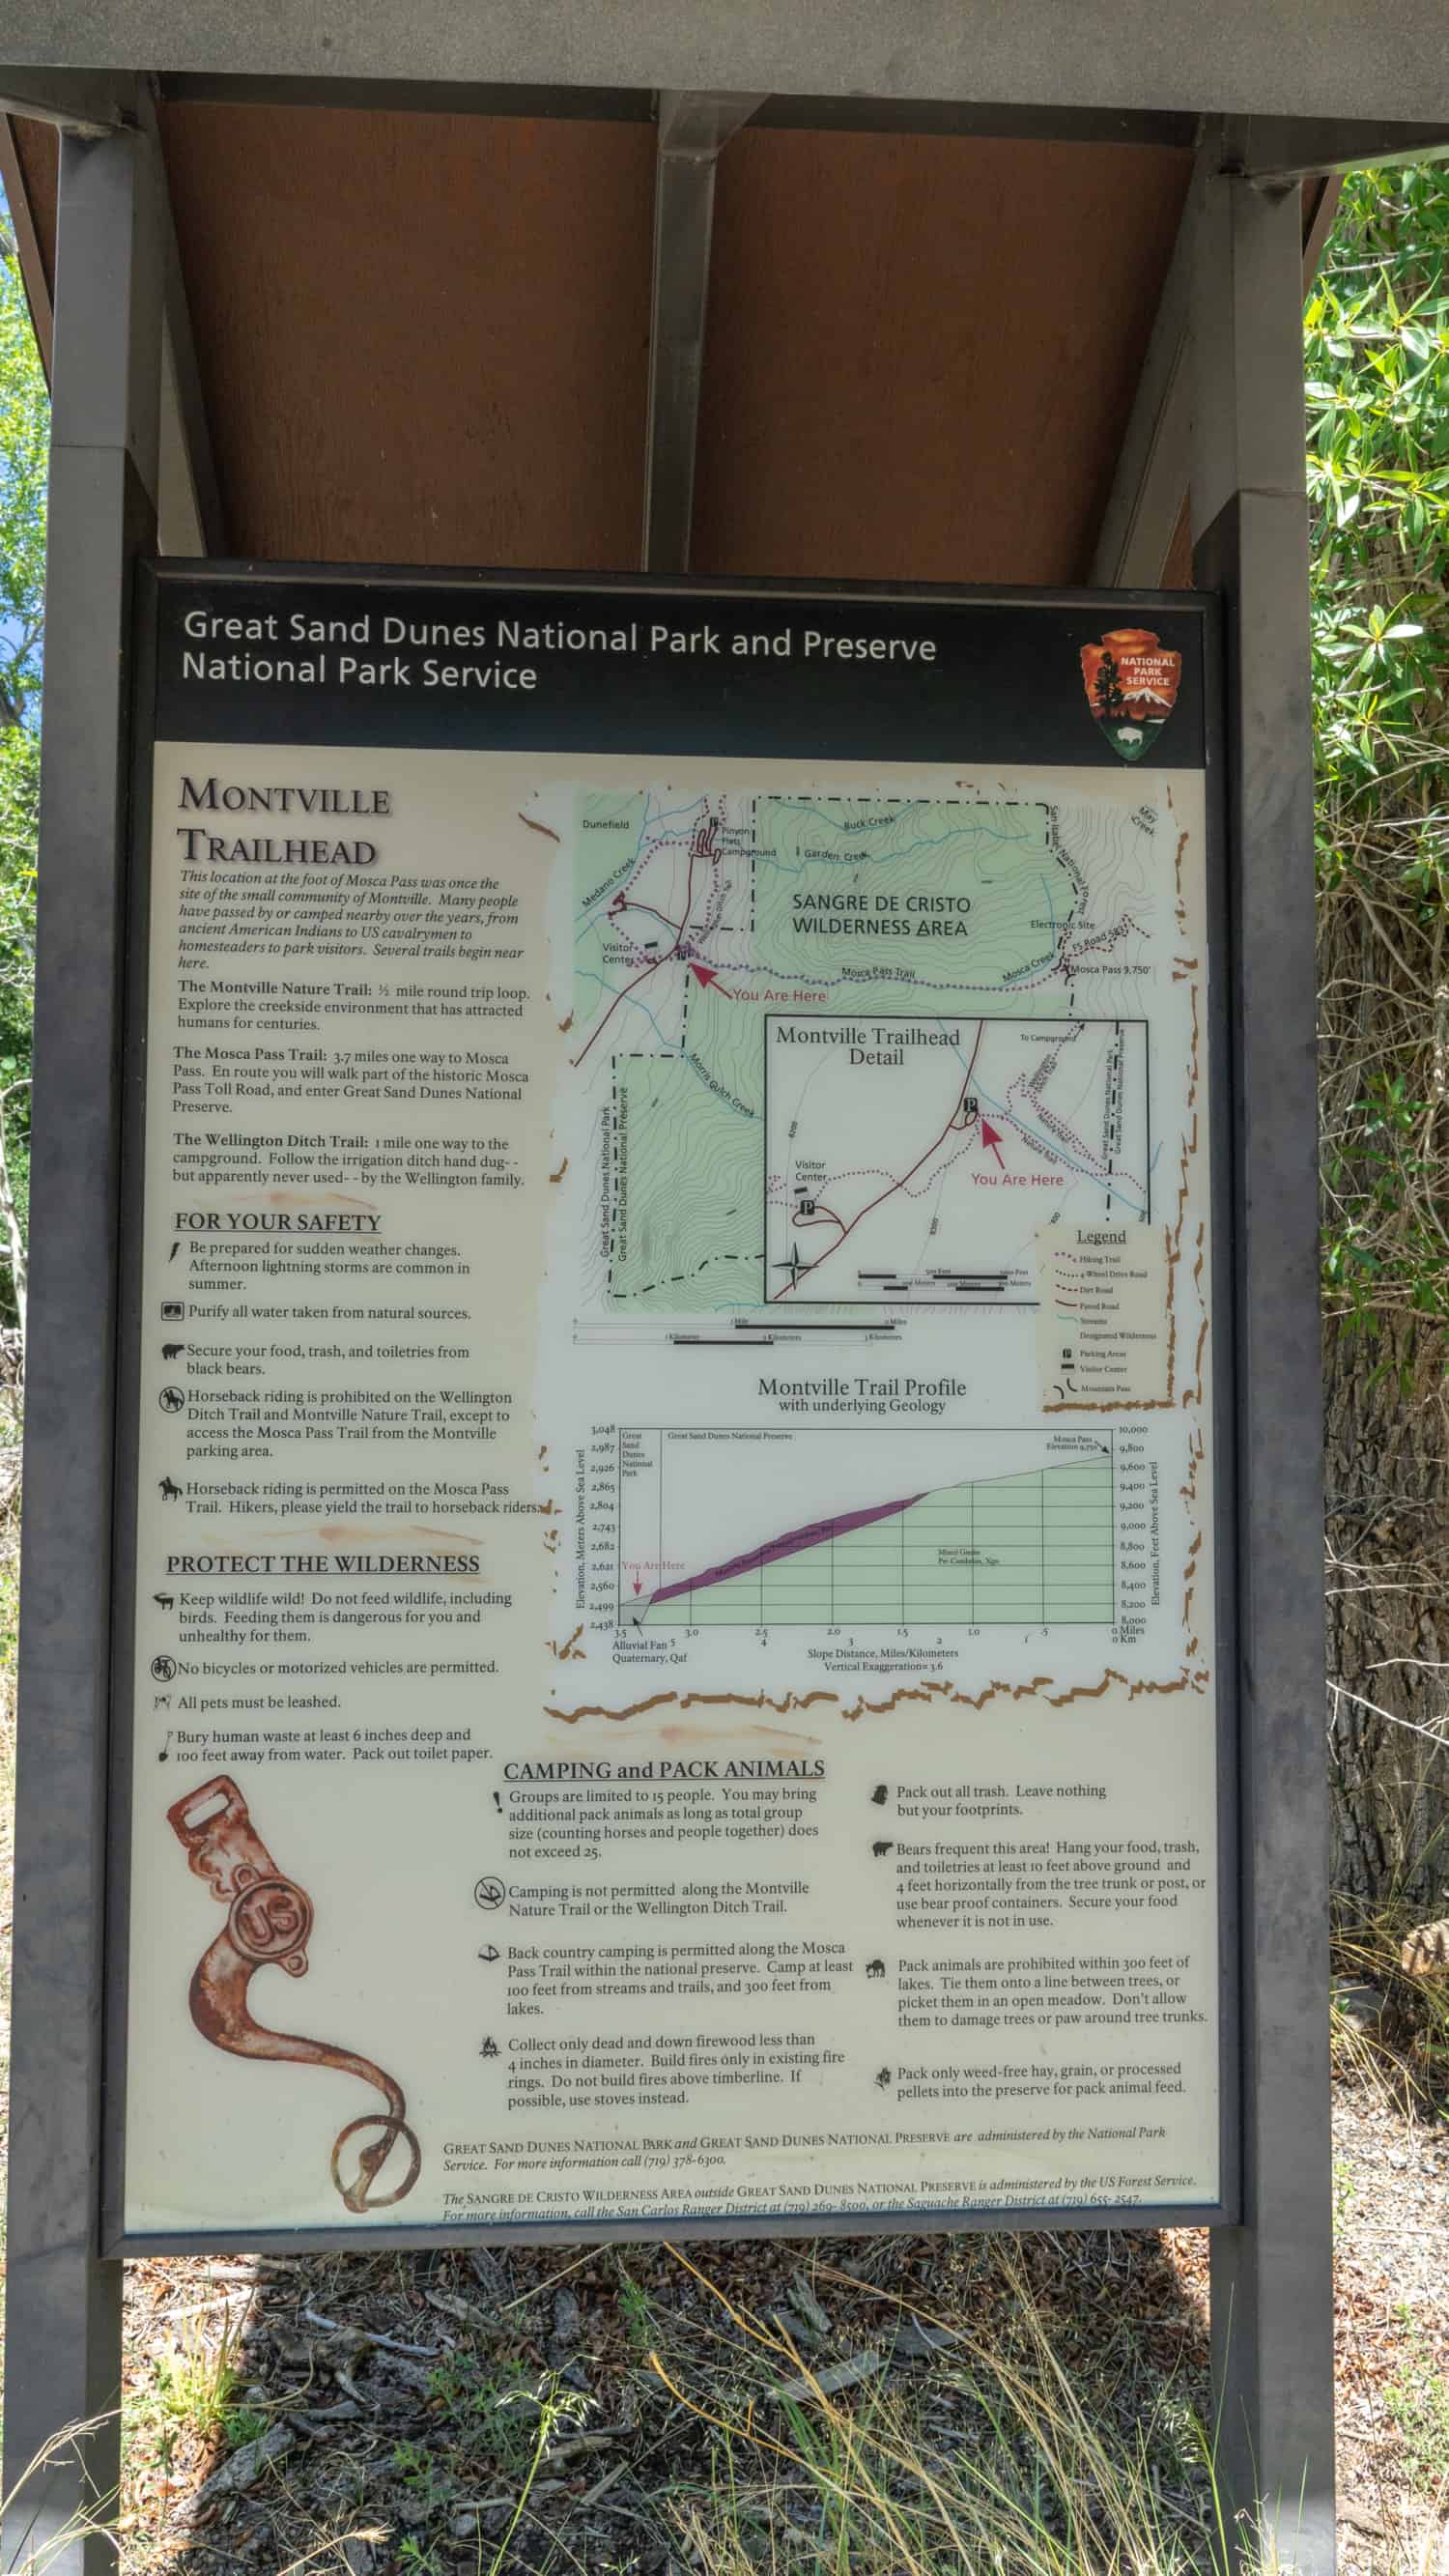 Sign showing trails suitable for pets in the Great Sand Dunes National Park